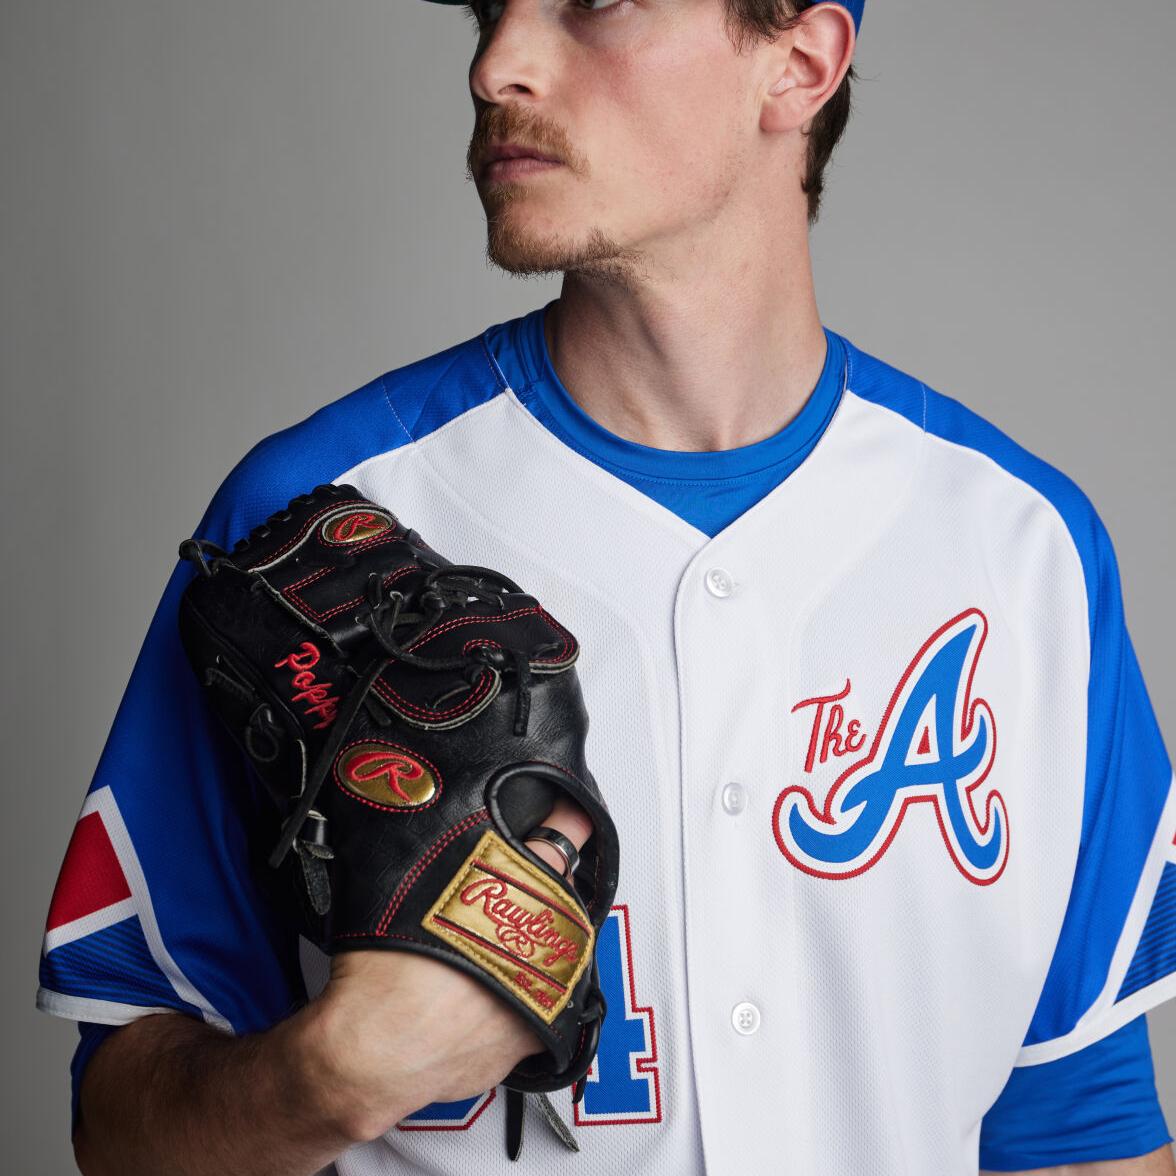 Braves unveil The A alternate uniforms and caps, Braves